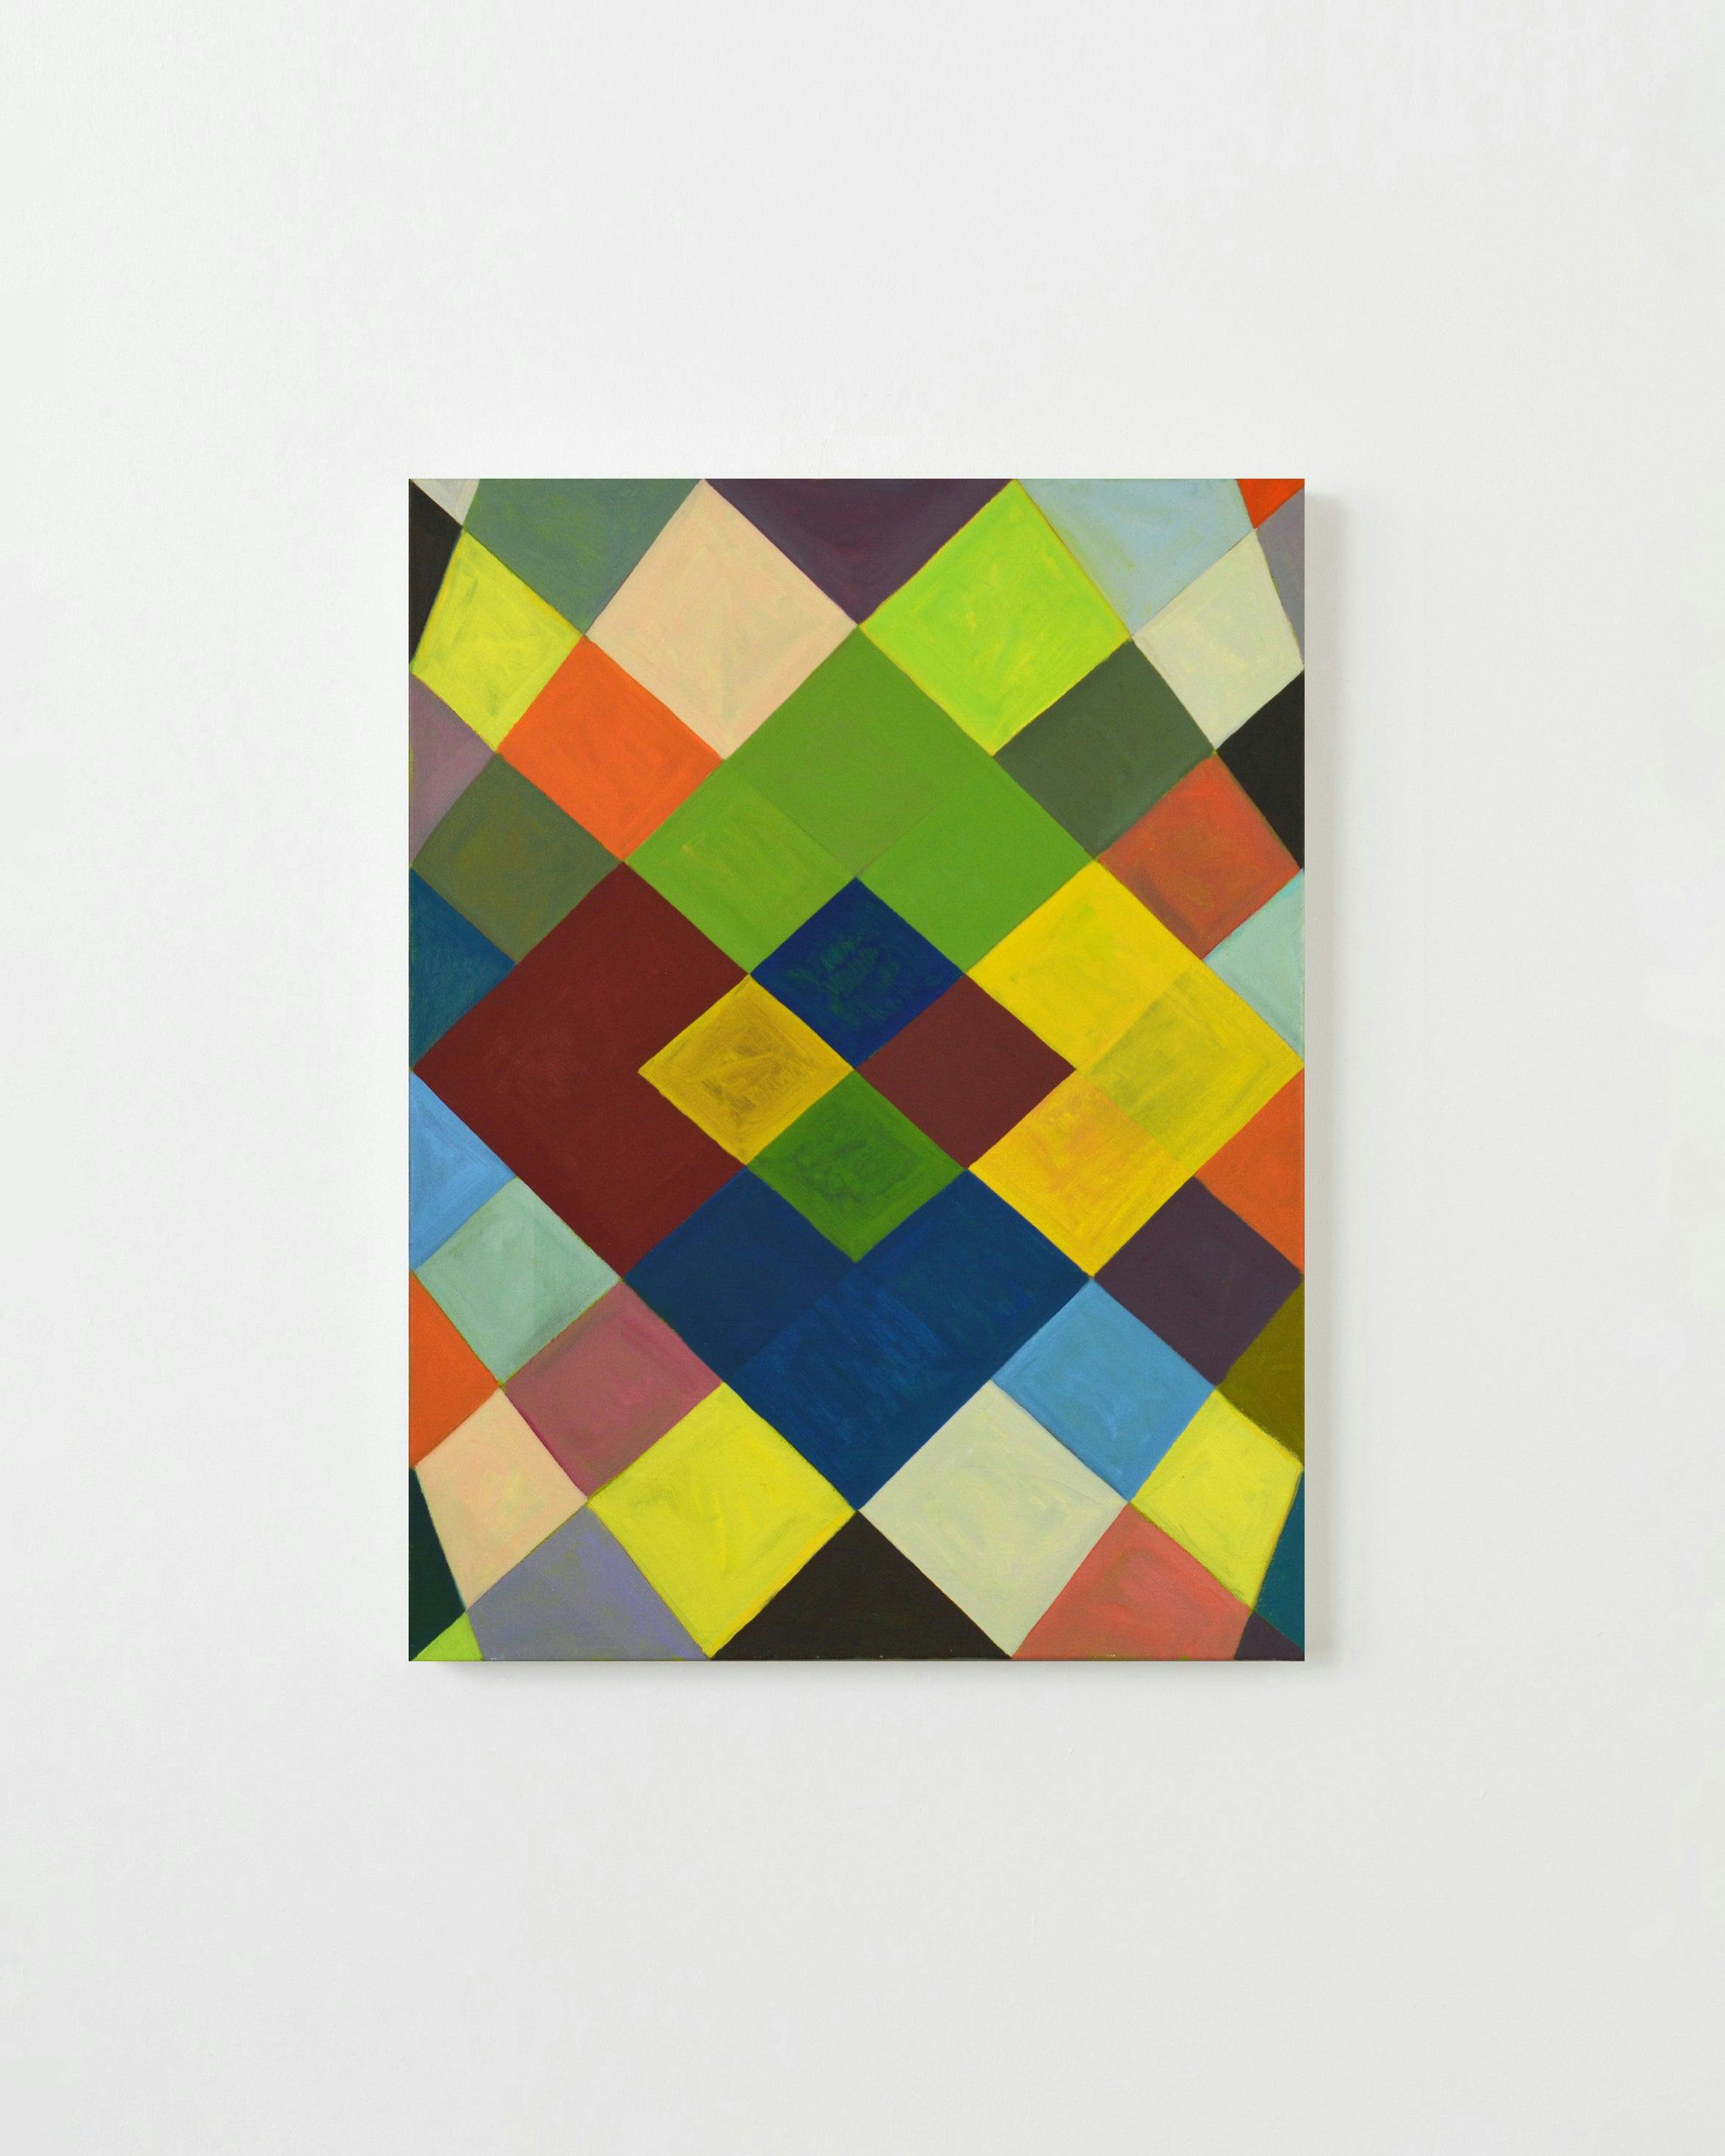 Painting by Jackie Meier titled "4 Square".